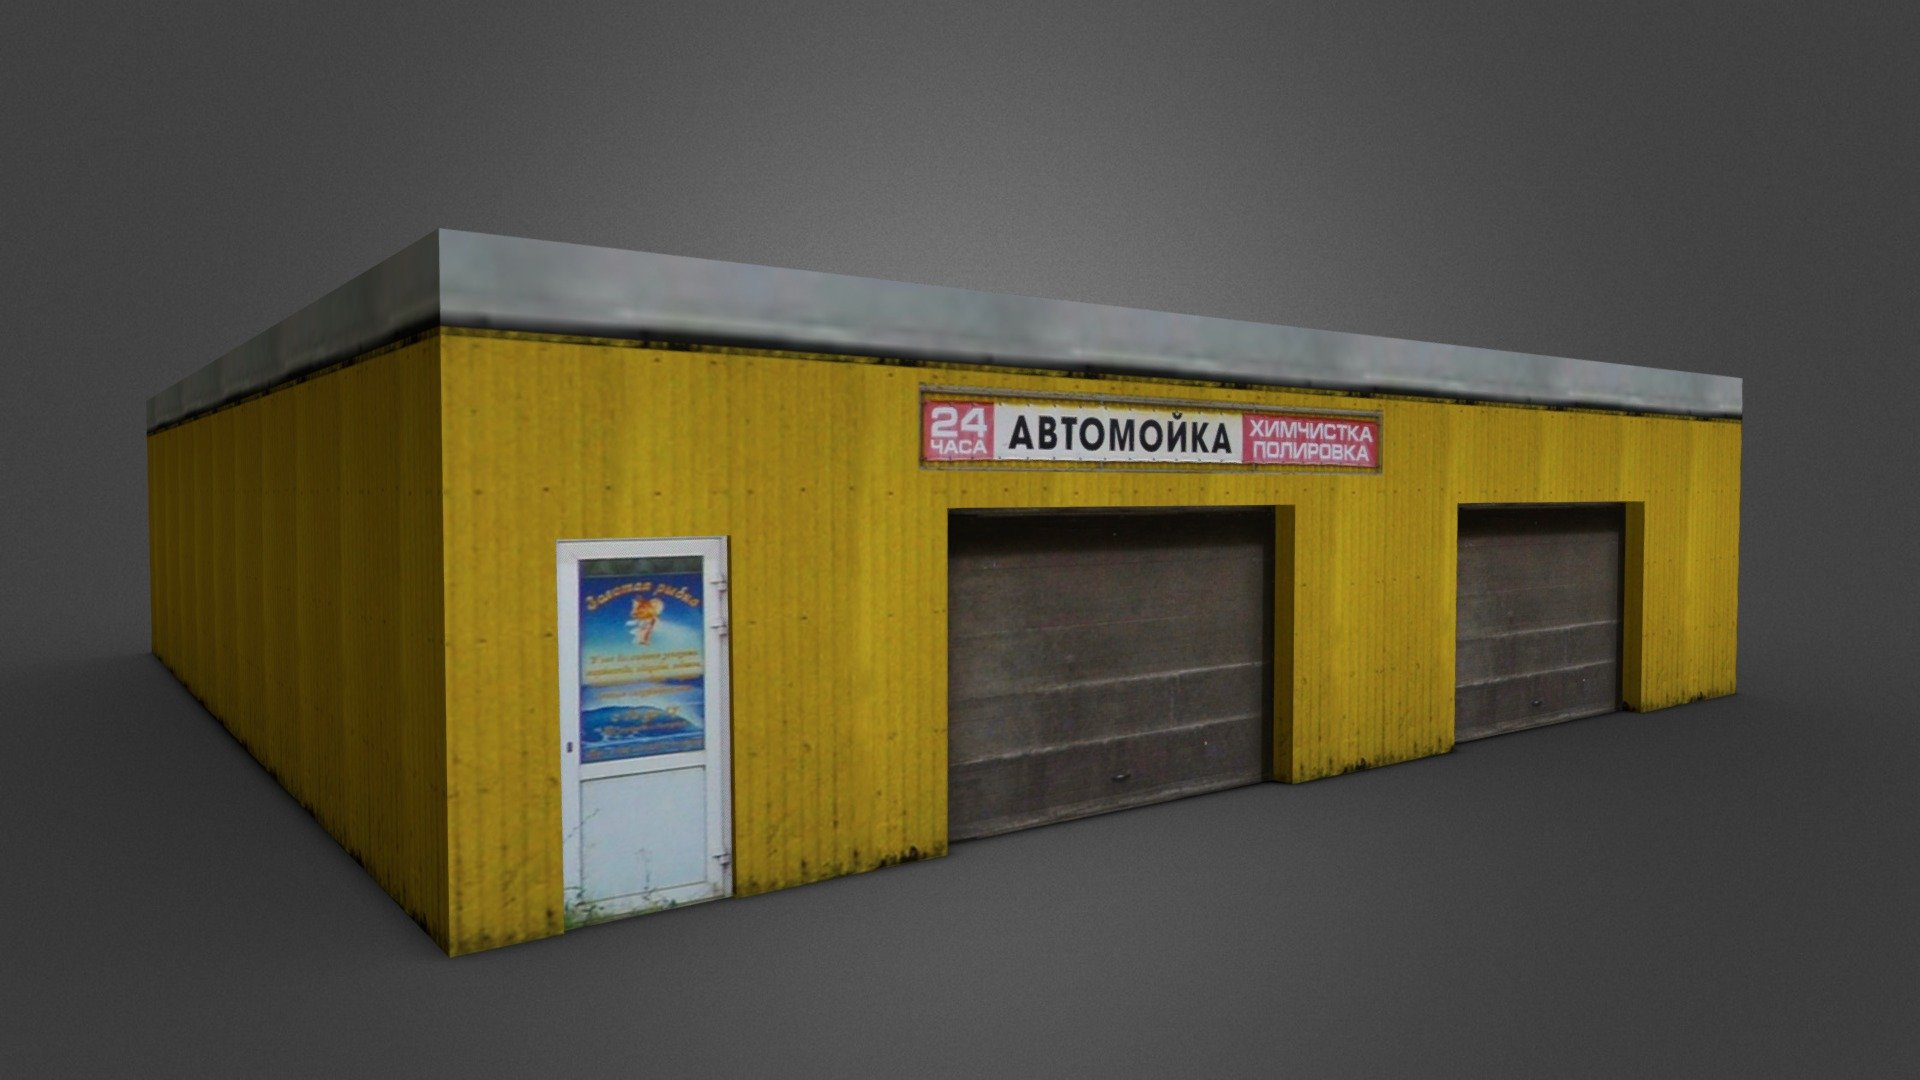 With russian lable's. 
Автомойка лоу поли - Low poly car wash center - Download Free 3D model by hasped0 3d model